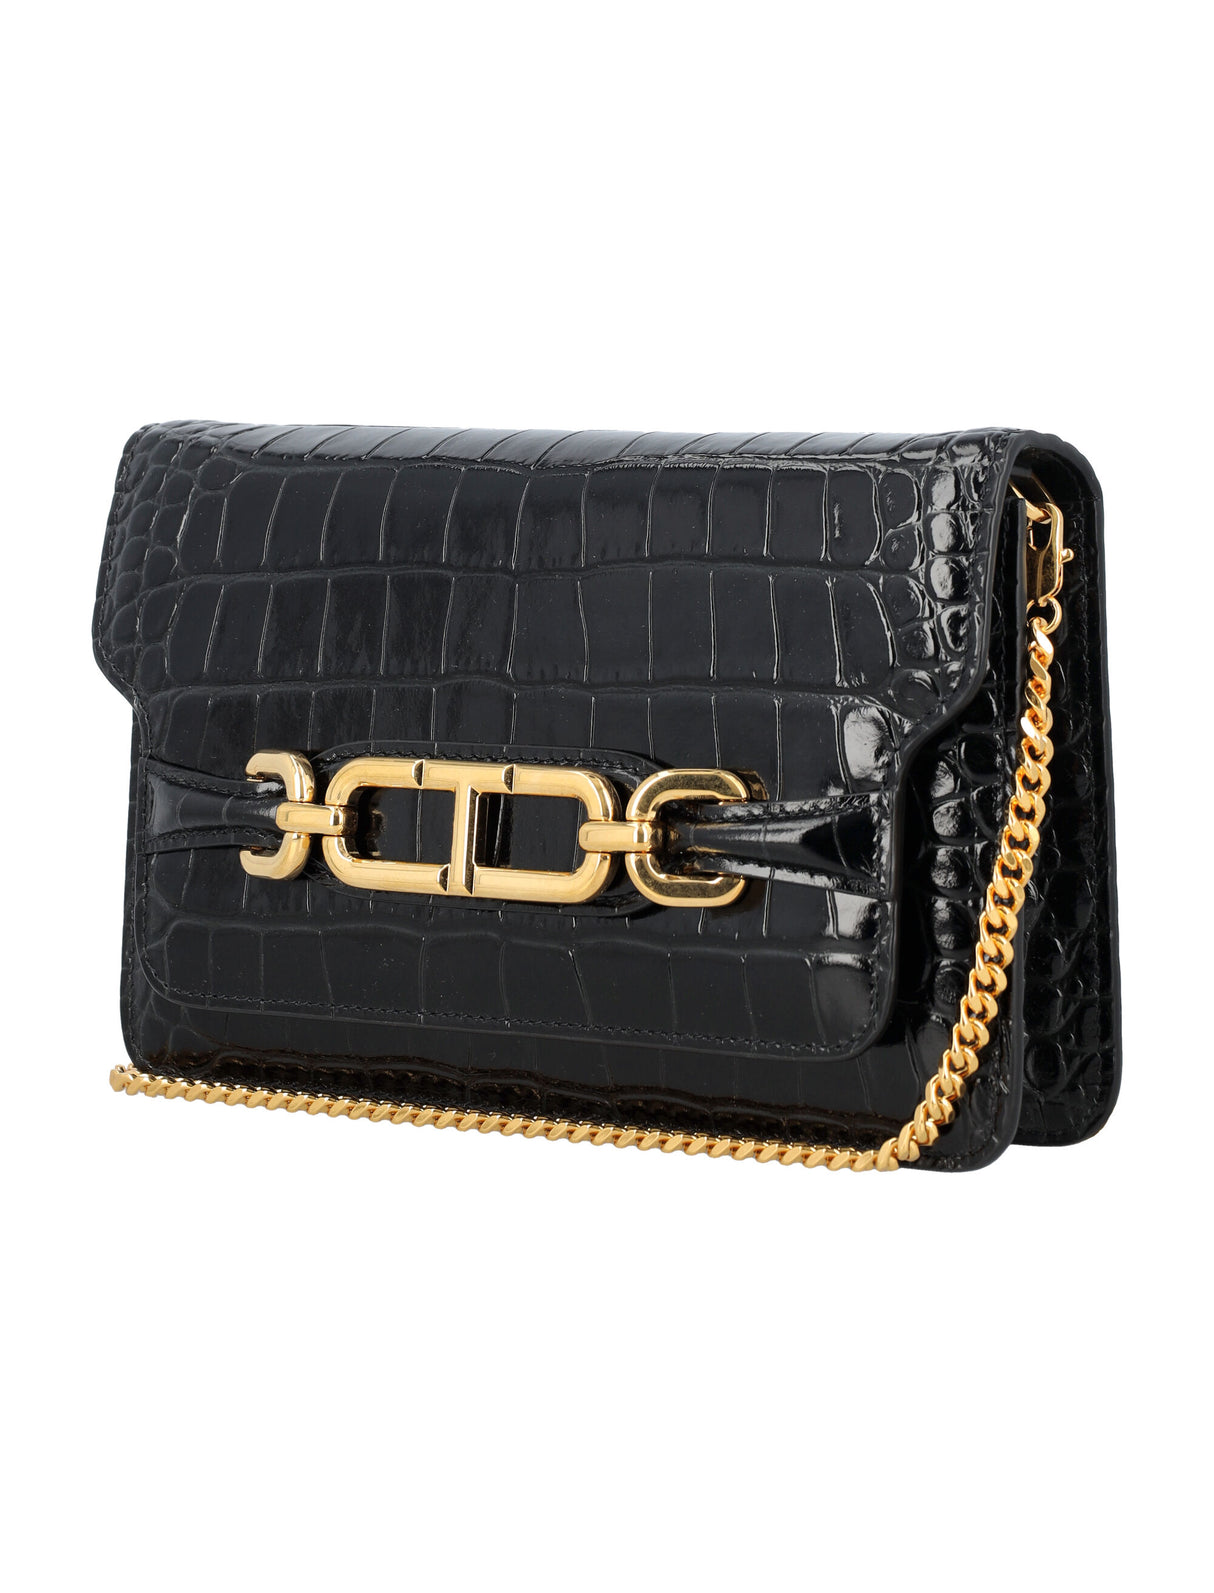 TOM FORD Whitney Mini Black Crocodile Embossed Leather Shoulder Bag with Chain Strap